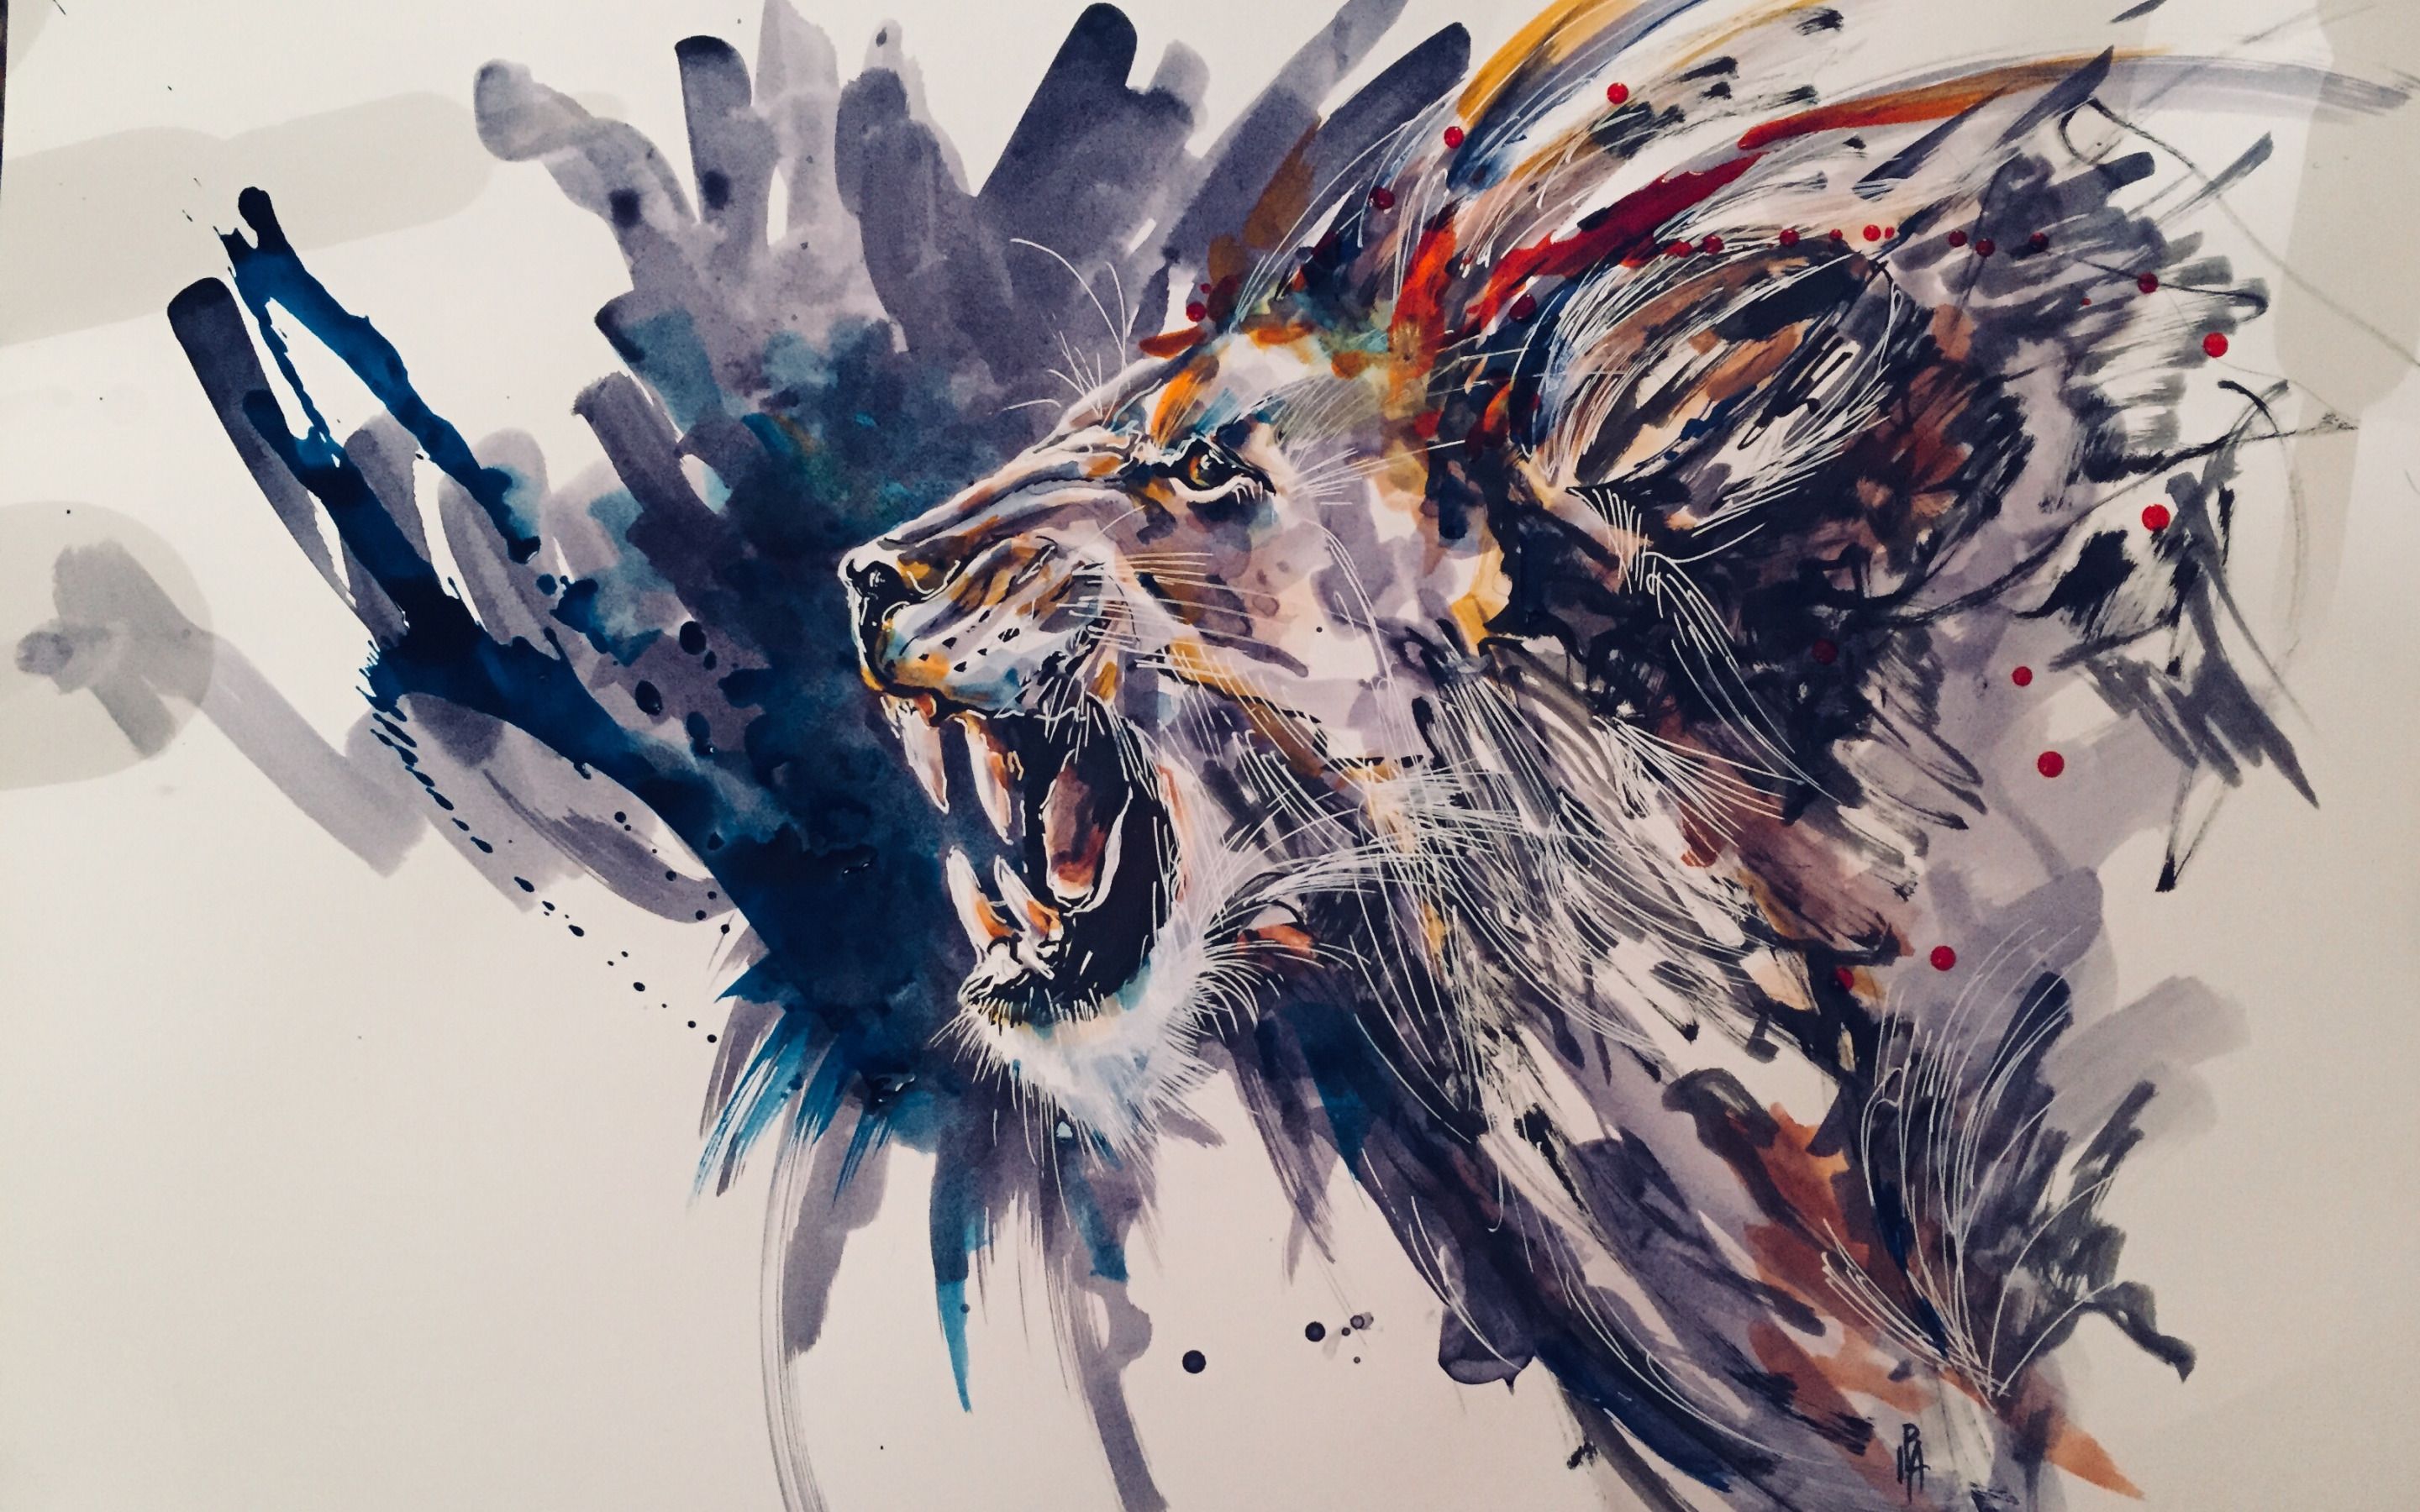 Download wallpaper Painted lion, grunge art, drawing lion, paint art, lion, predator for desktop with resolution 2880x1800. High Quality HD picture wallpaper